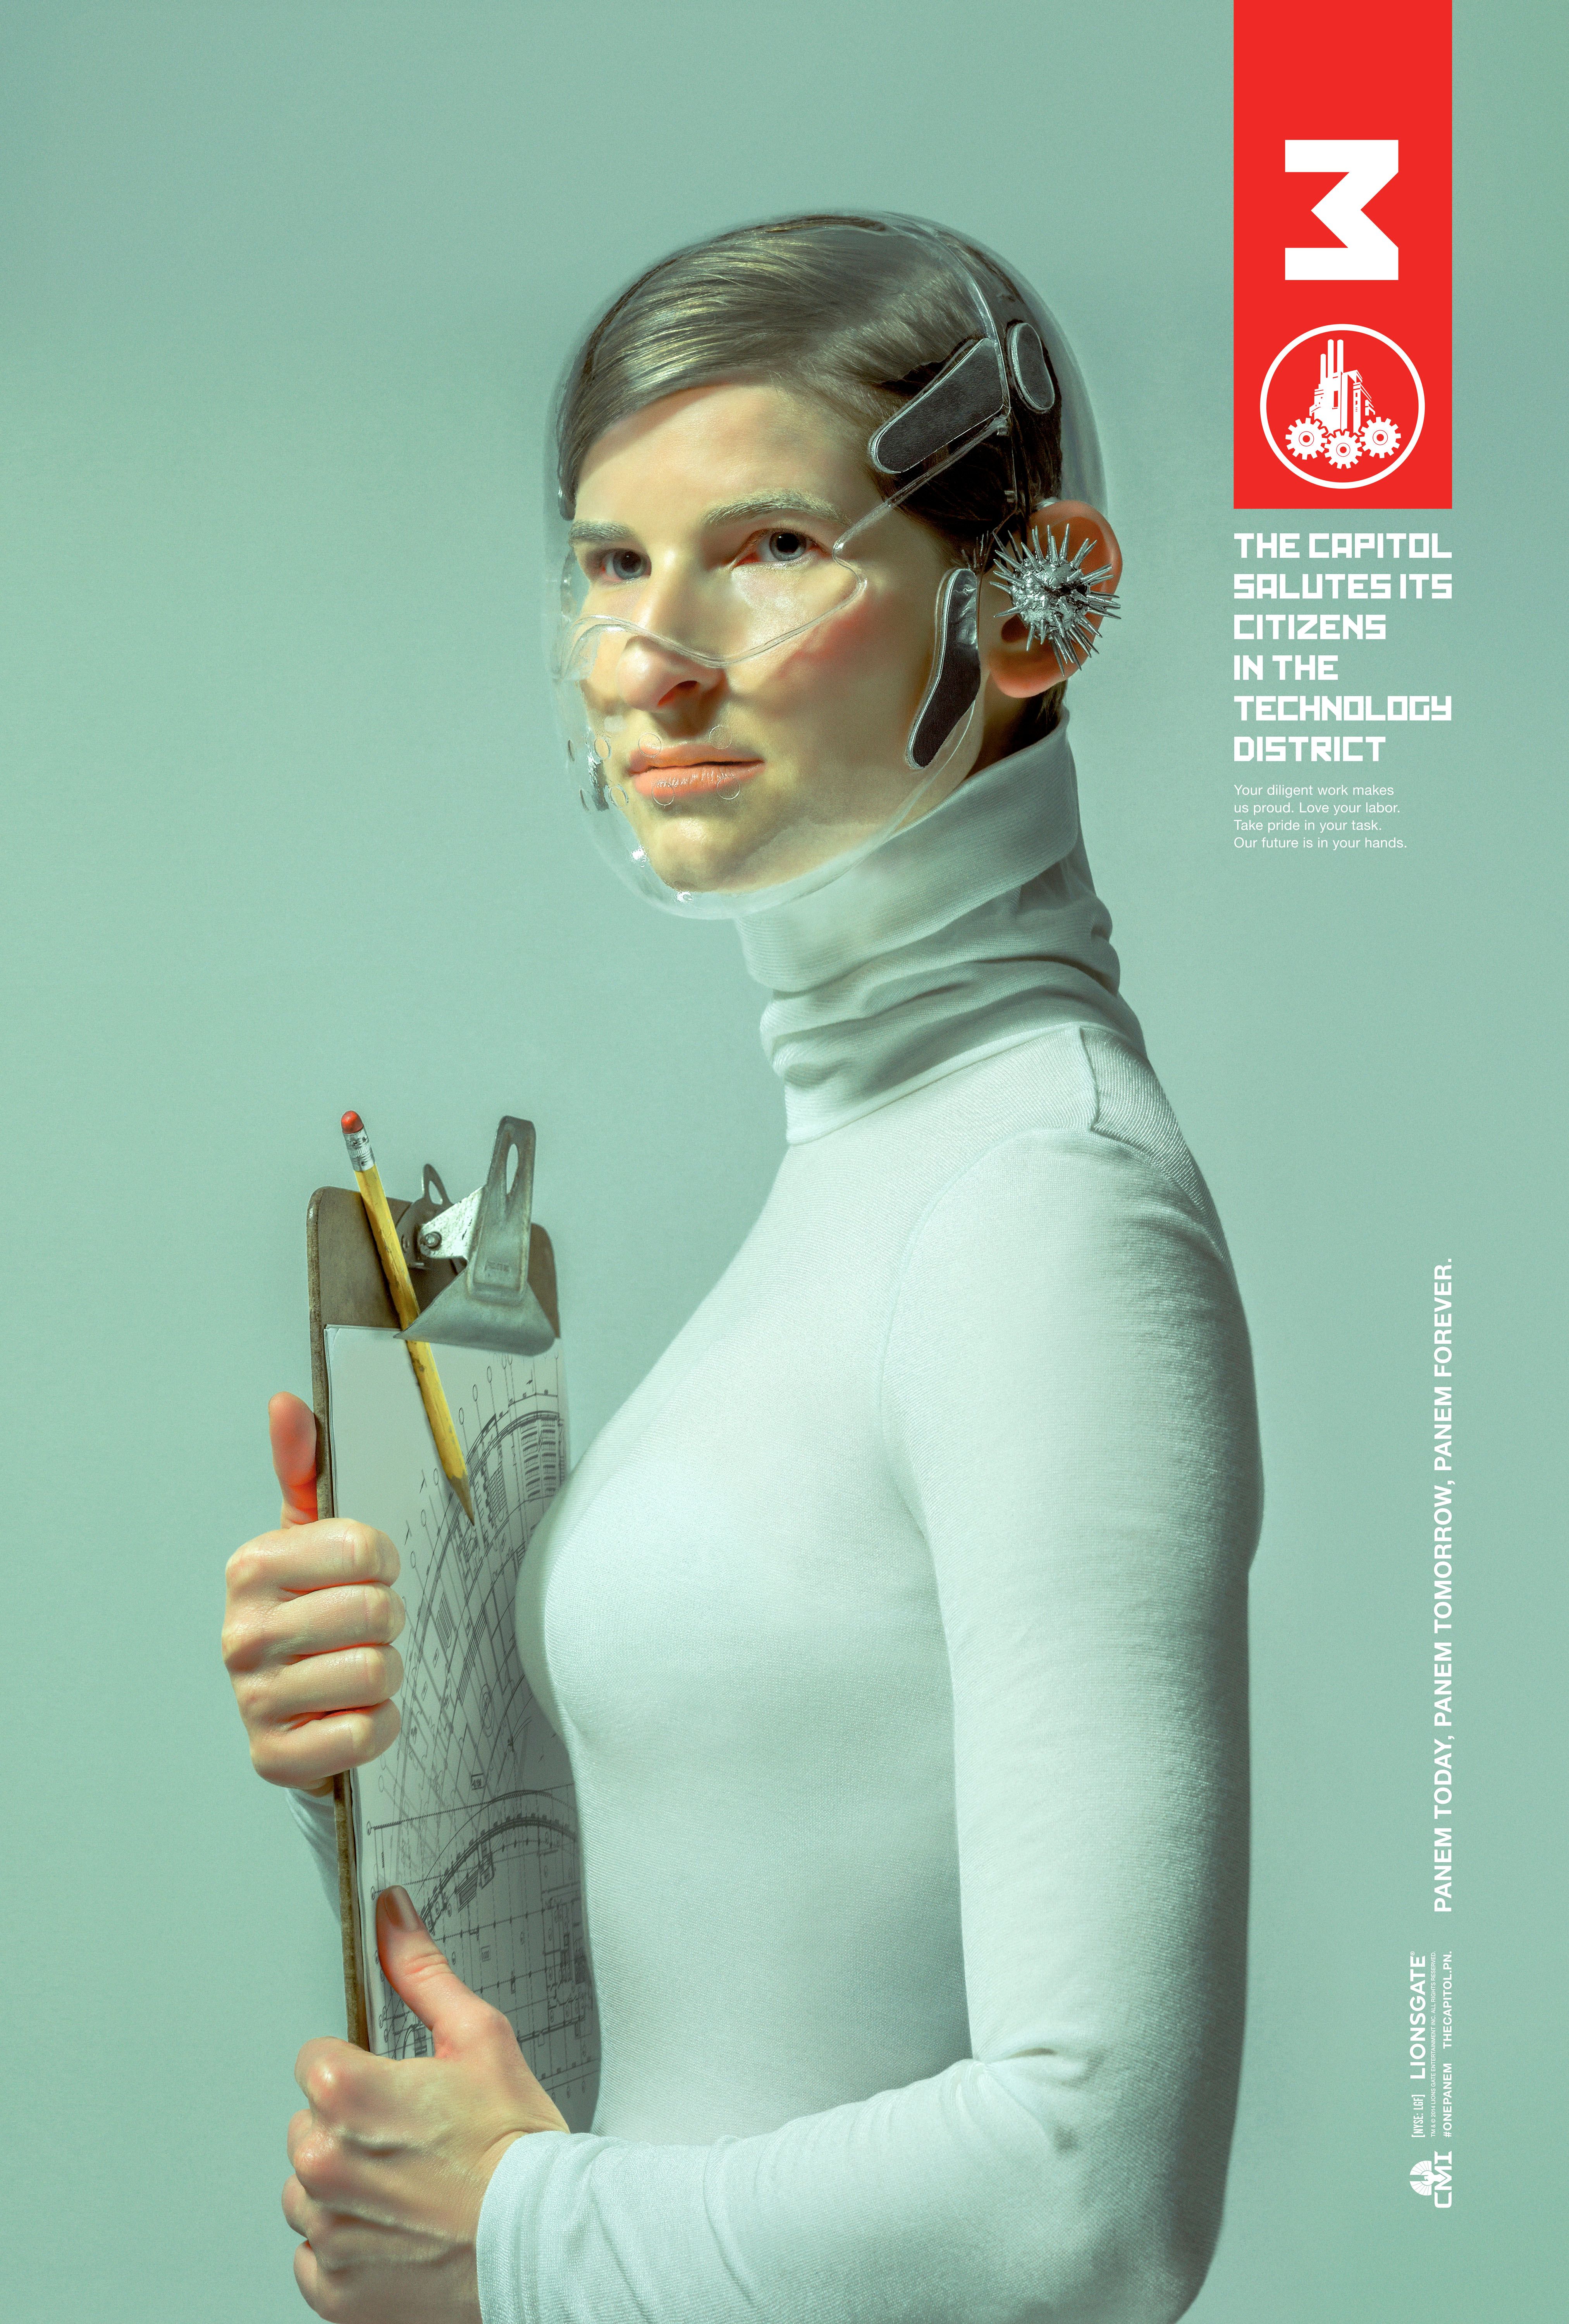 Hunger Games Mockingjay Posters Celebrate District Heroes & Odd Fashion